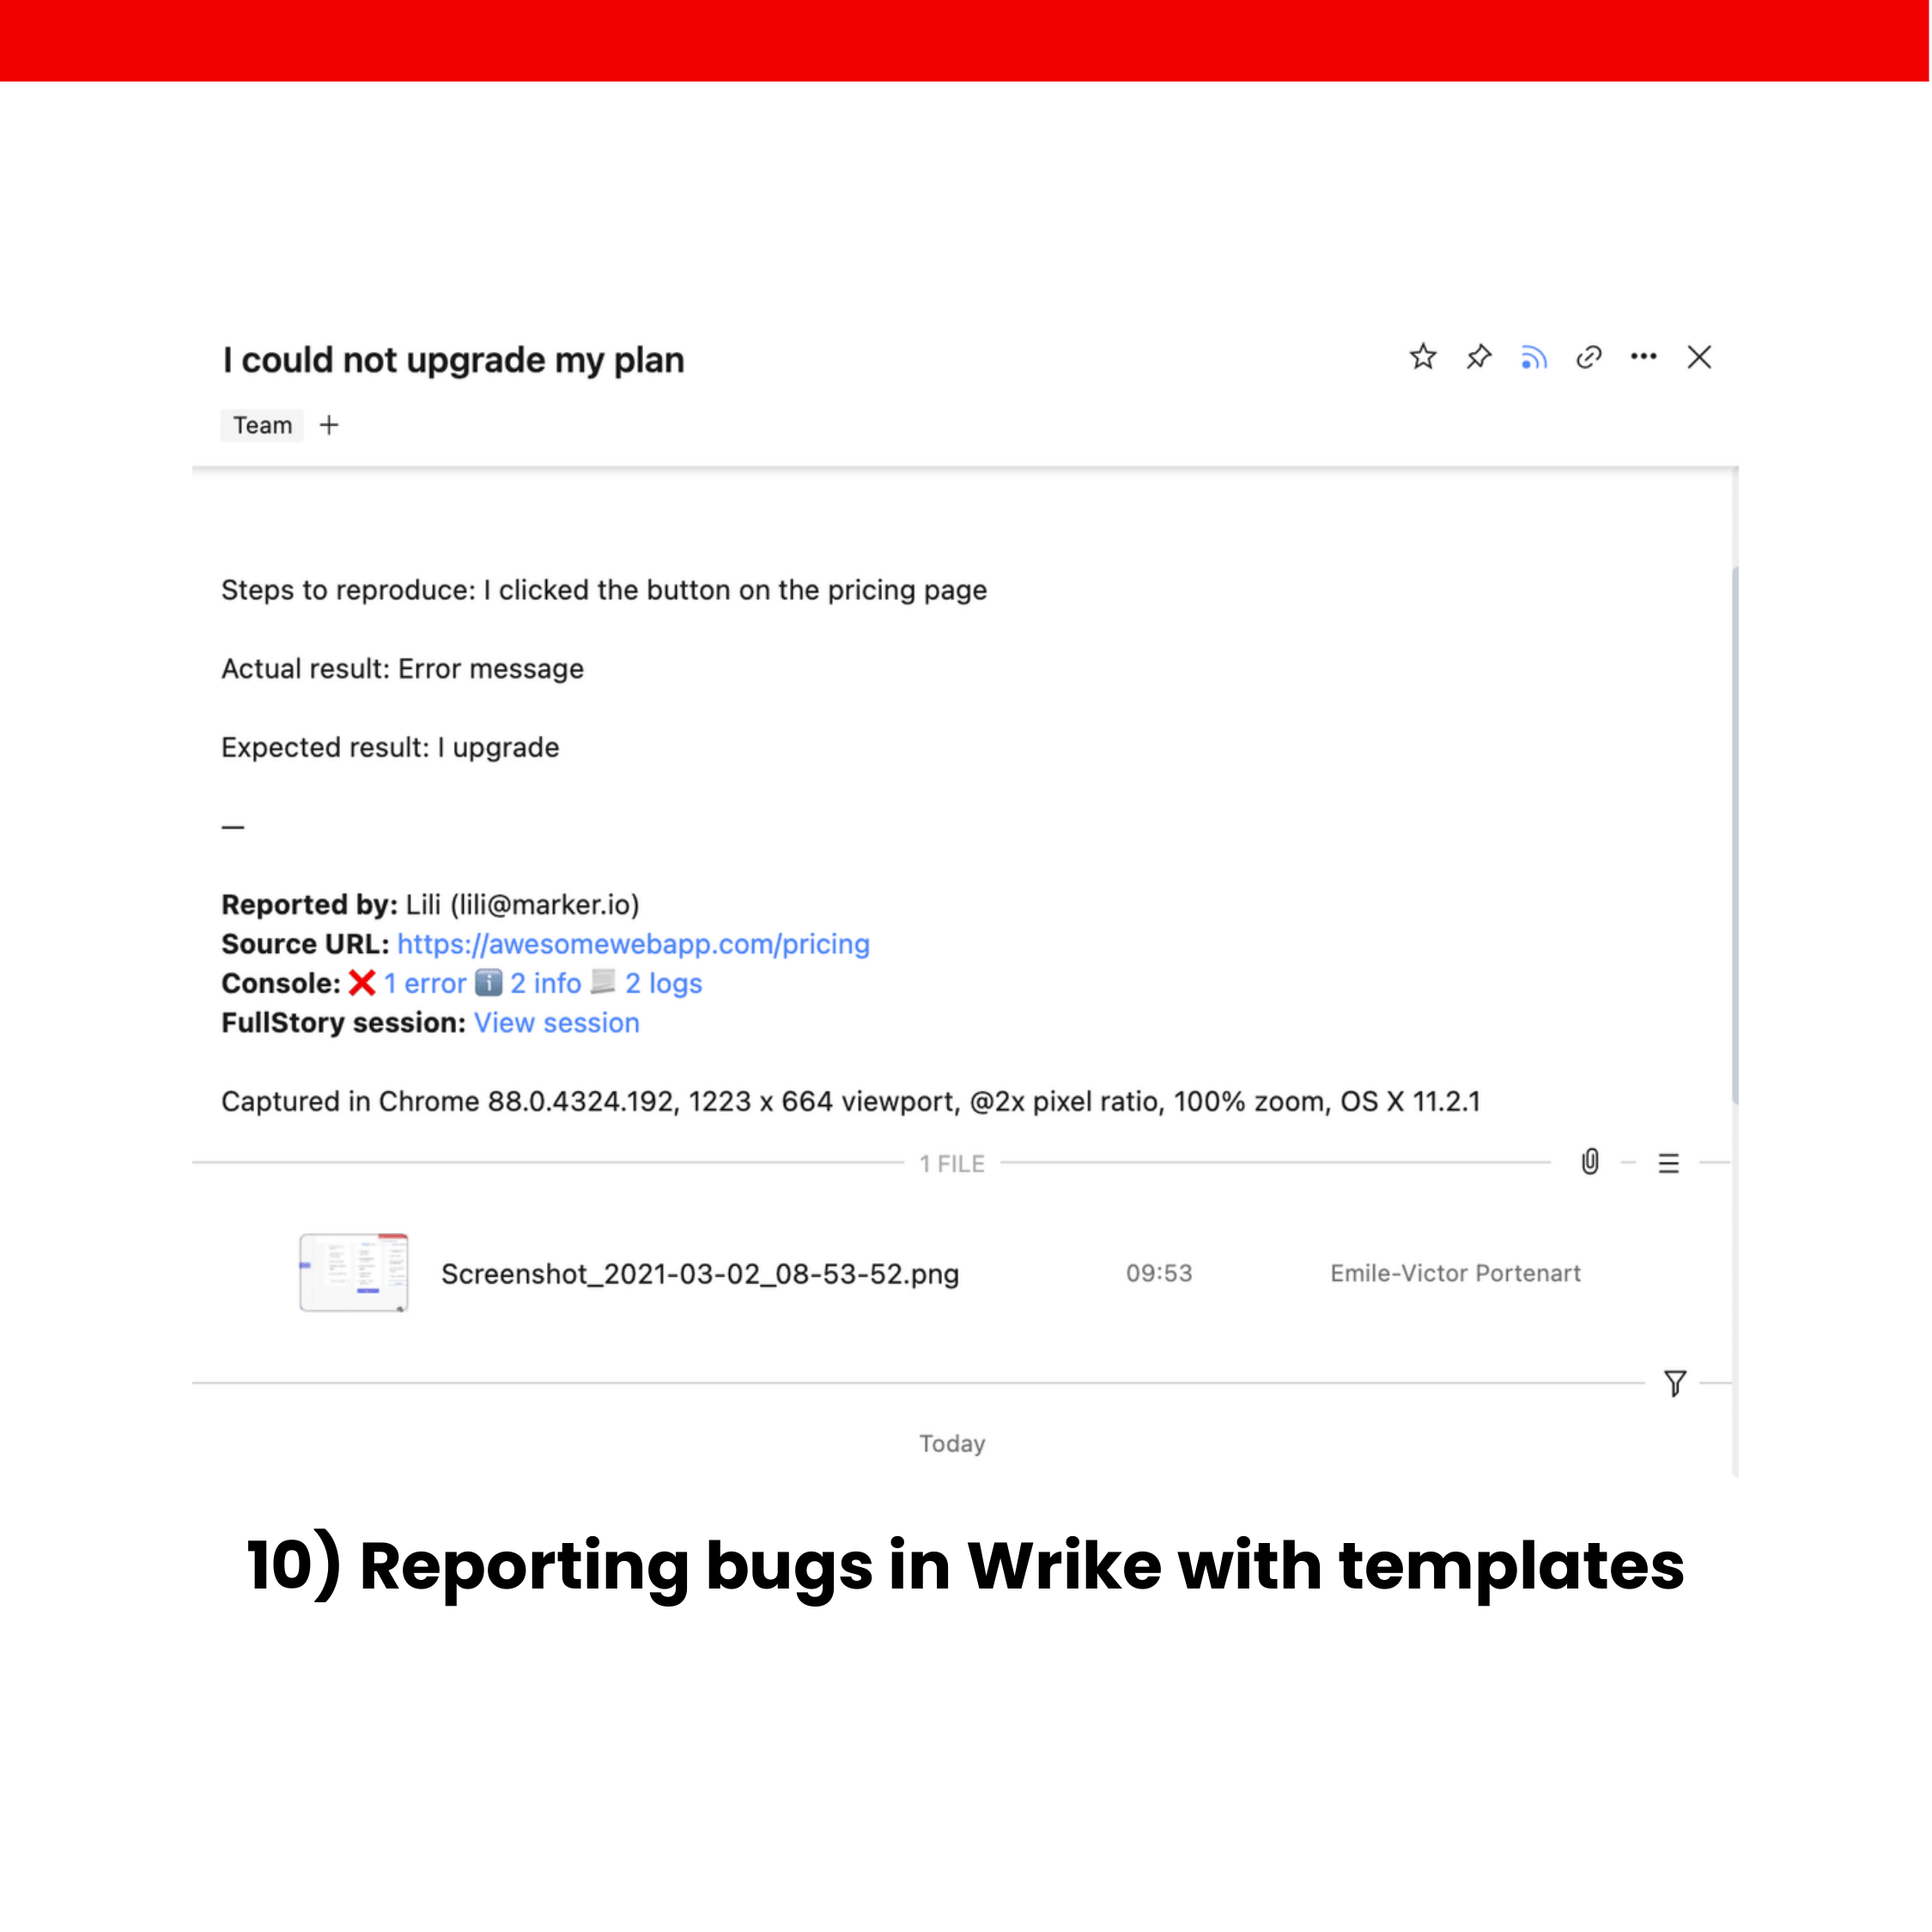 10) Reporting bugs in Wrike with templates